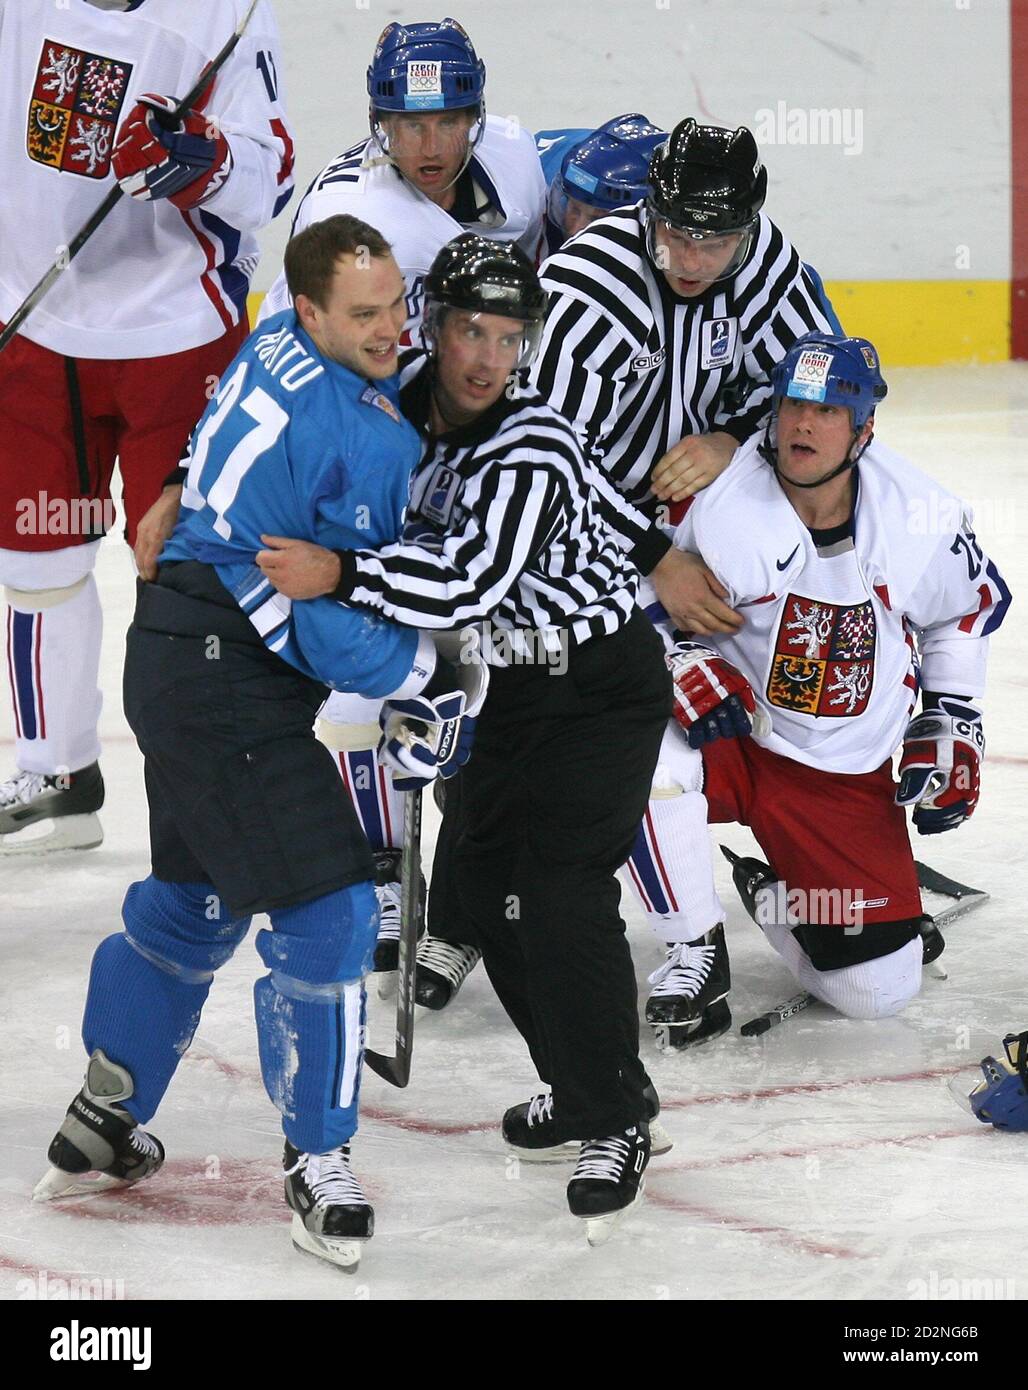 Finland's Jarkko Ruutu (L) is pulled away from Czech Republic's Martin  Straka (R) by a linesman after Ruutu checked hard into the boards Czech  Republic's captain Jaromir Jagr, during second period play